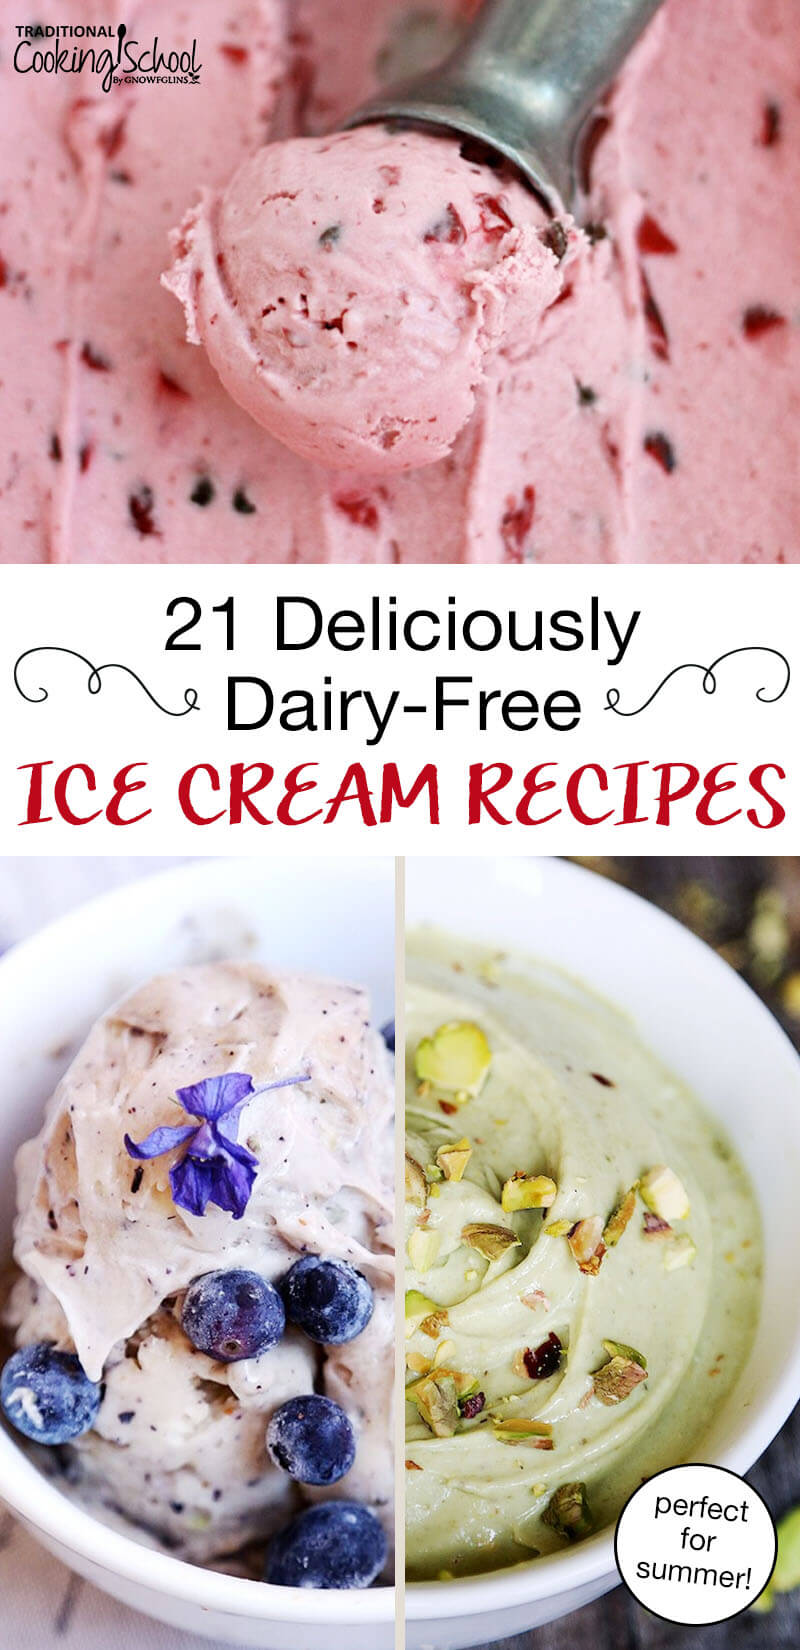 21 Dairy-Free Ice Cream Recipes You'll Want To Try This Summer!